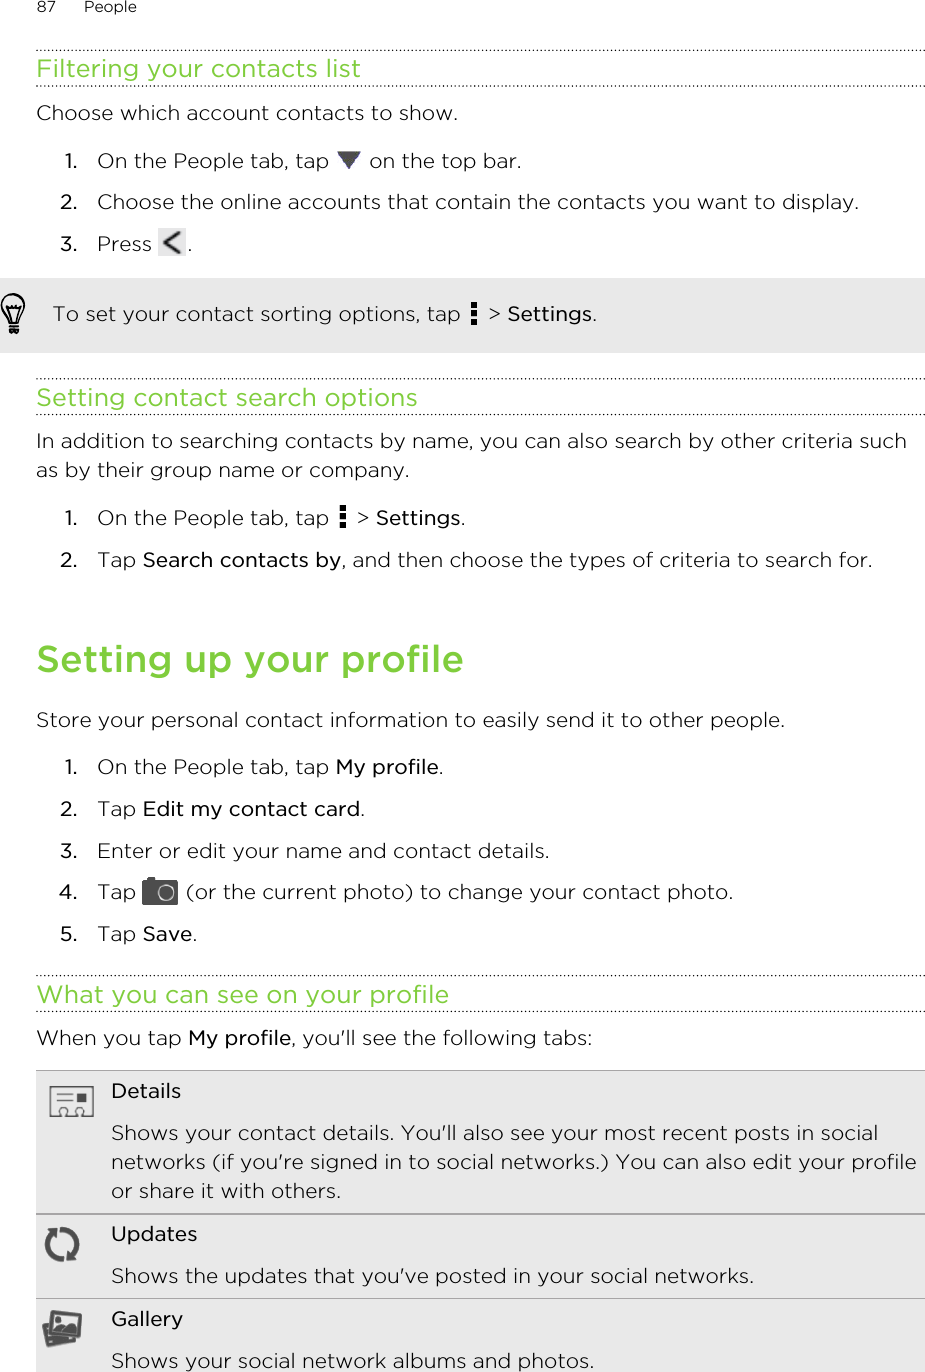 Filtering your contacts listChoose which account contacts to show.1. On the People tab, tap   on the top bar.2. Choose the online accounts that contain the contacts you want to display.3. Press  .To set your contact sorting options, tap   &gt; Settings.Setting contact search optionsIn addition to searching contacts by name, you can also search by other criteria suchas by their group name or company.1. On the People tab, tap   &gt; Settings.2. Tap Search contacts by, and then choose the types of criteria to search for.Setting up your profileStore your personal contact information to easily send it to other people.1. On the People tab, tap My profile.2. Tap Edit my contact card.3. Enter or edit your name and contact details.4. Tap   (or the current photo) to change your contact photo.5. Tap Save.What you can see on your profileWhen you tap My profile, you&apos;ll see the following tabs:DetailsShows your contact details. You&apos;ll also see your most recent posts in socialnetworks (if you&apos;re signed in to social networks.) You can also edit your profileor share it with others.UpdatesShows the updates that you&apos;ve posted in your social networks.GalleryShows your social network albums and photos.87 People